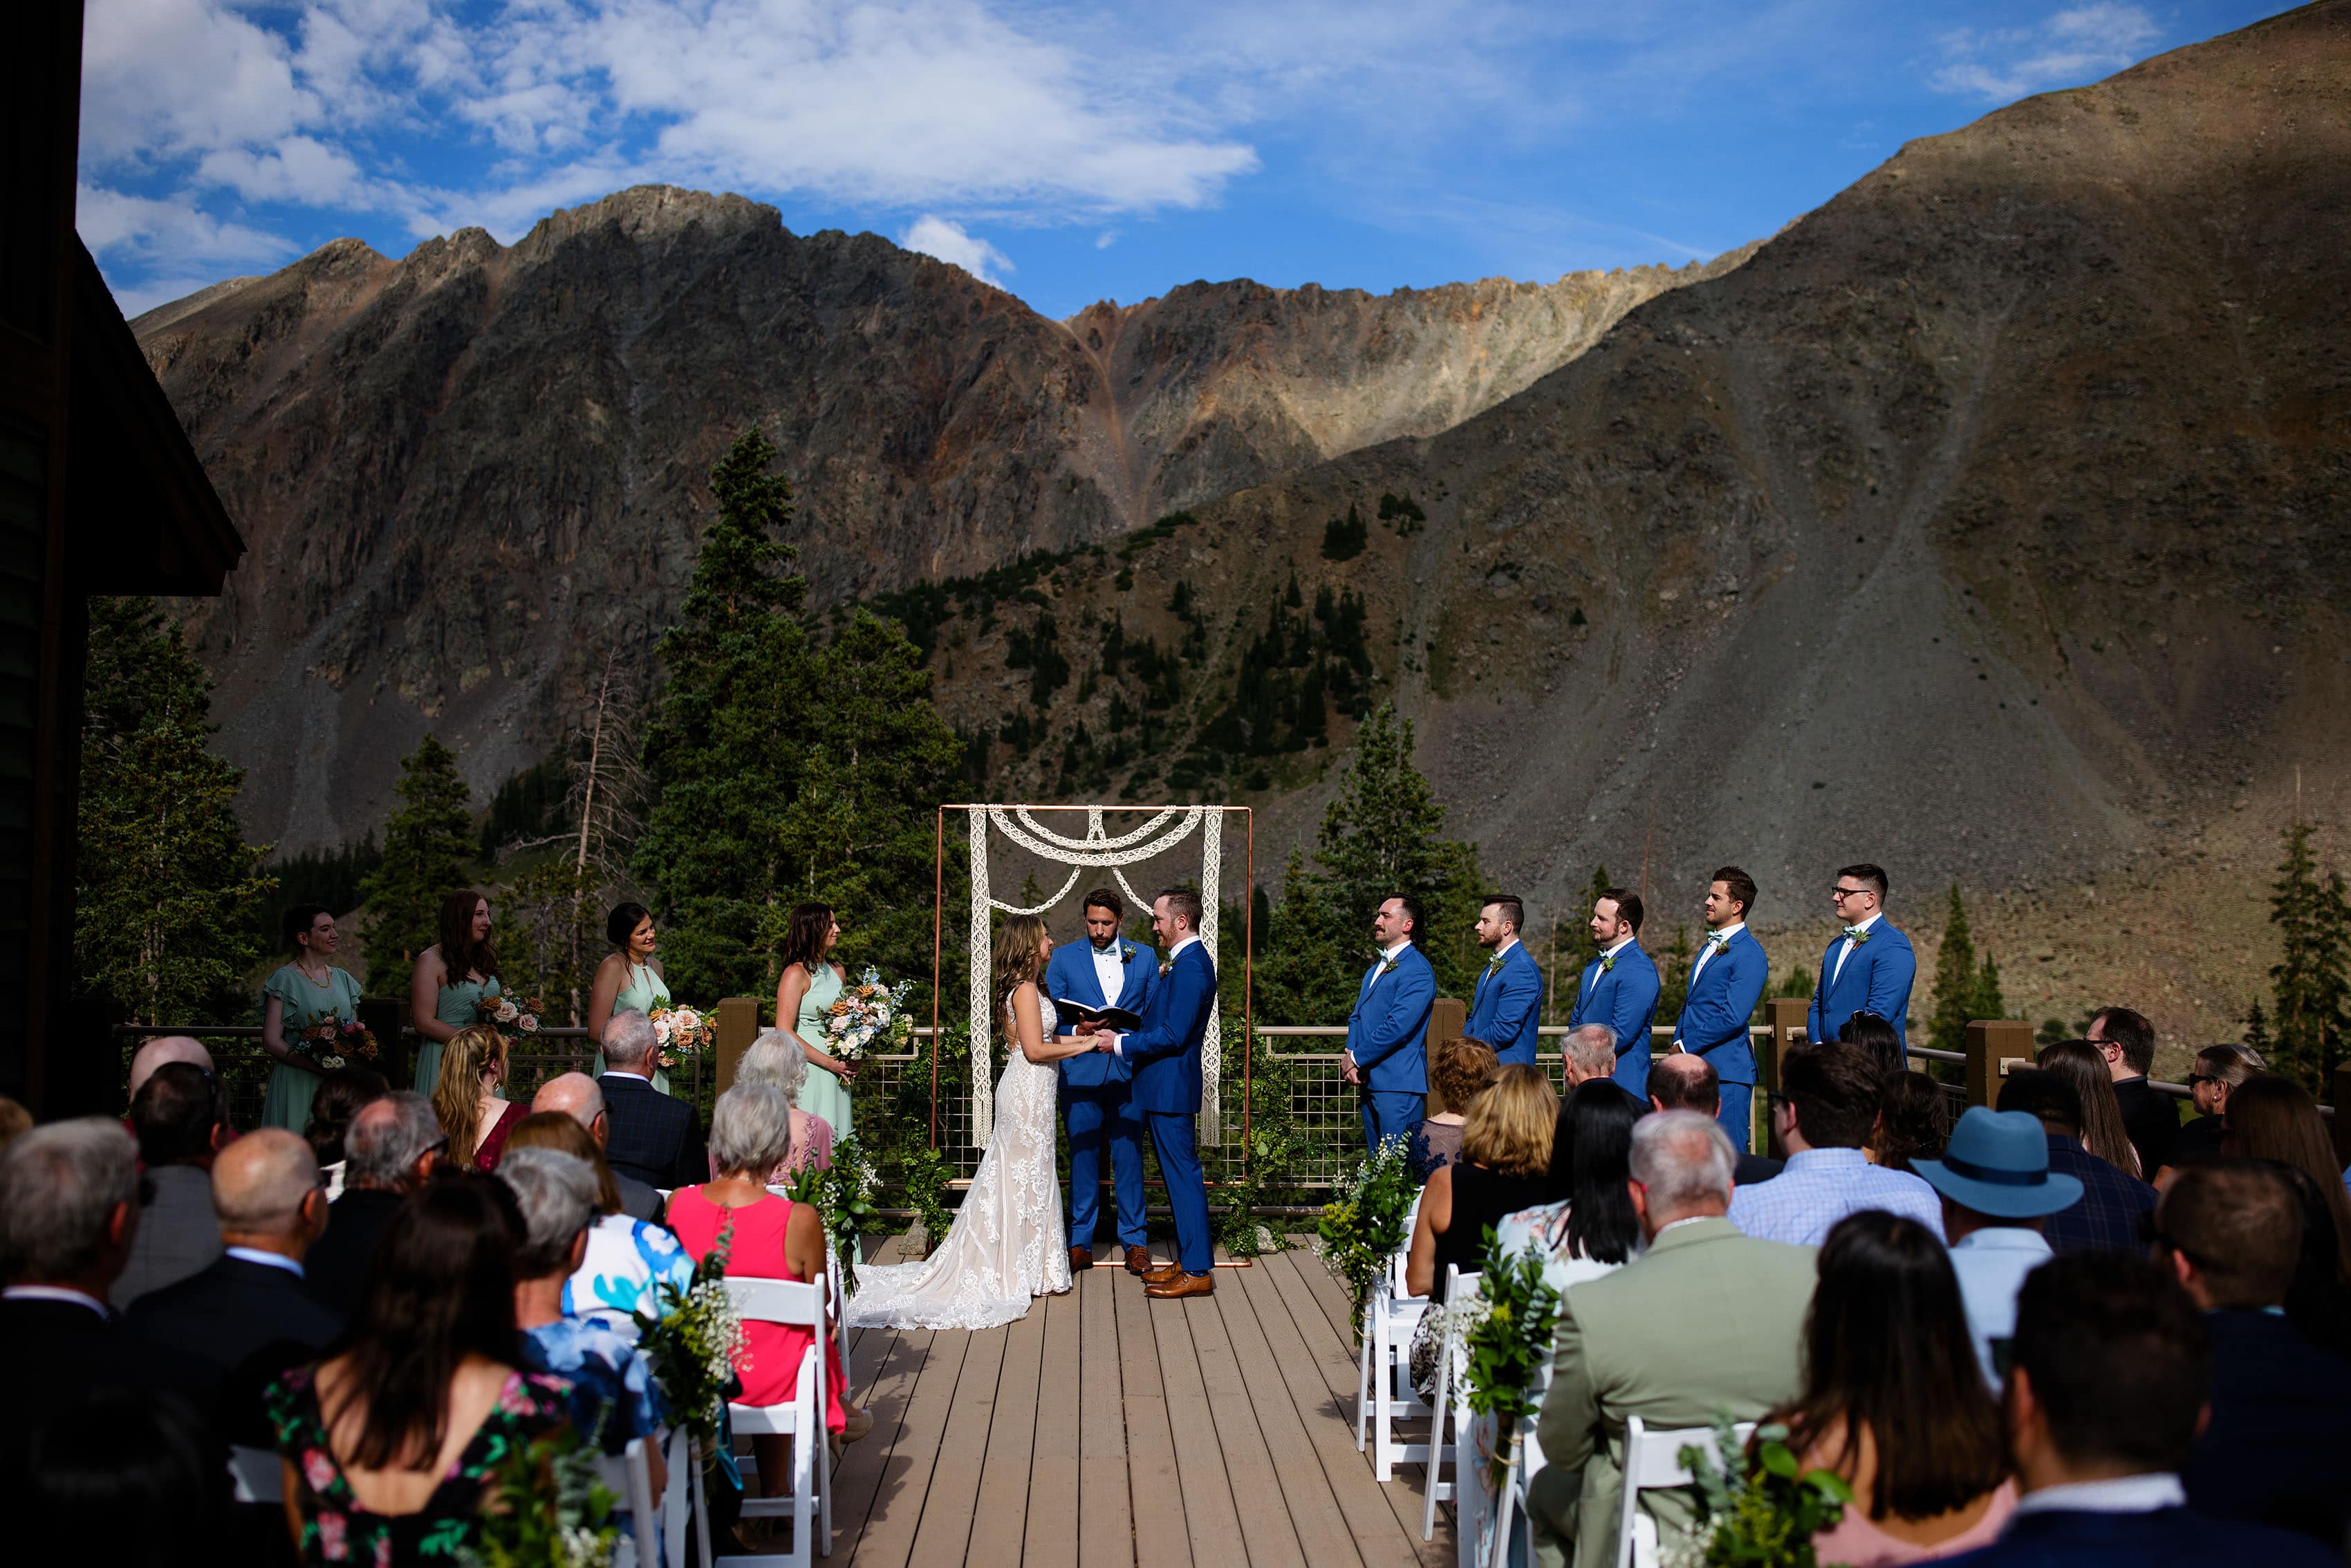 The bride and groom hold hands during their ceremony at Arapahoe Basin Black Mountain Lodge